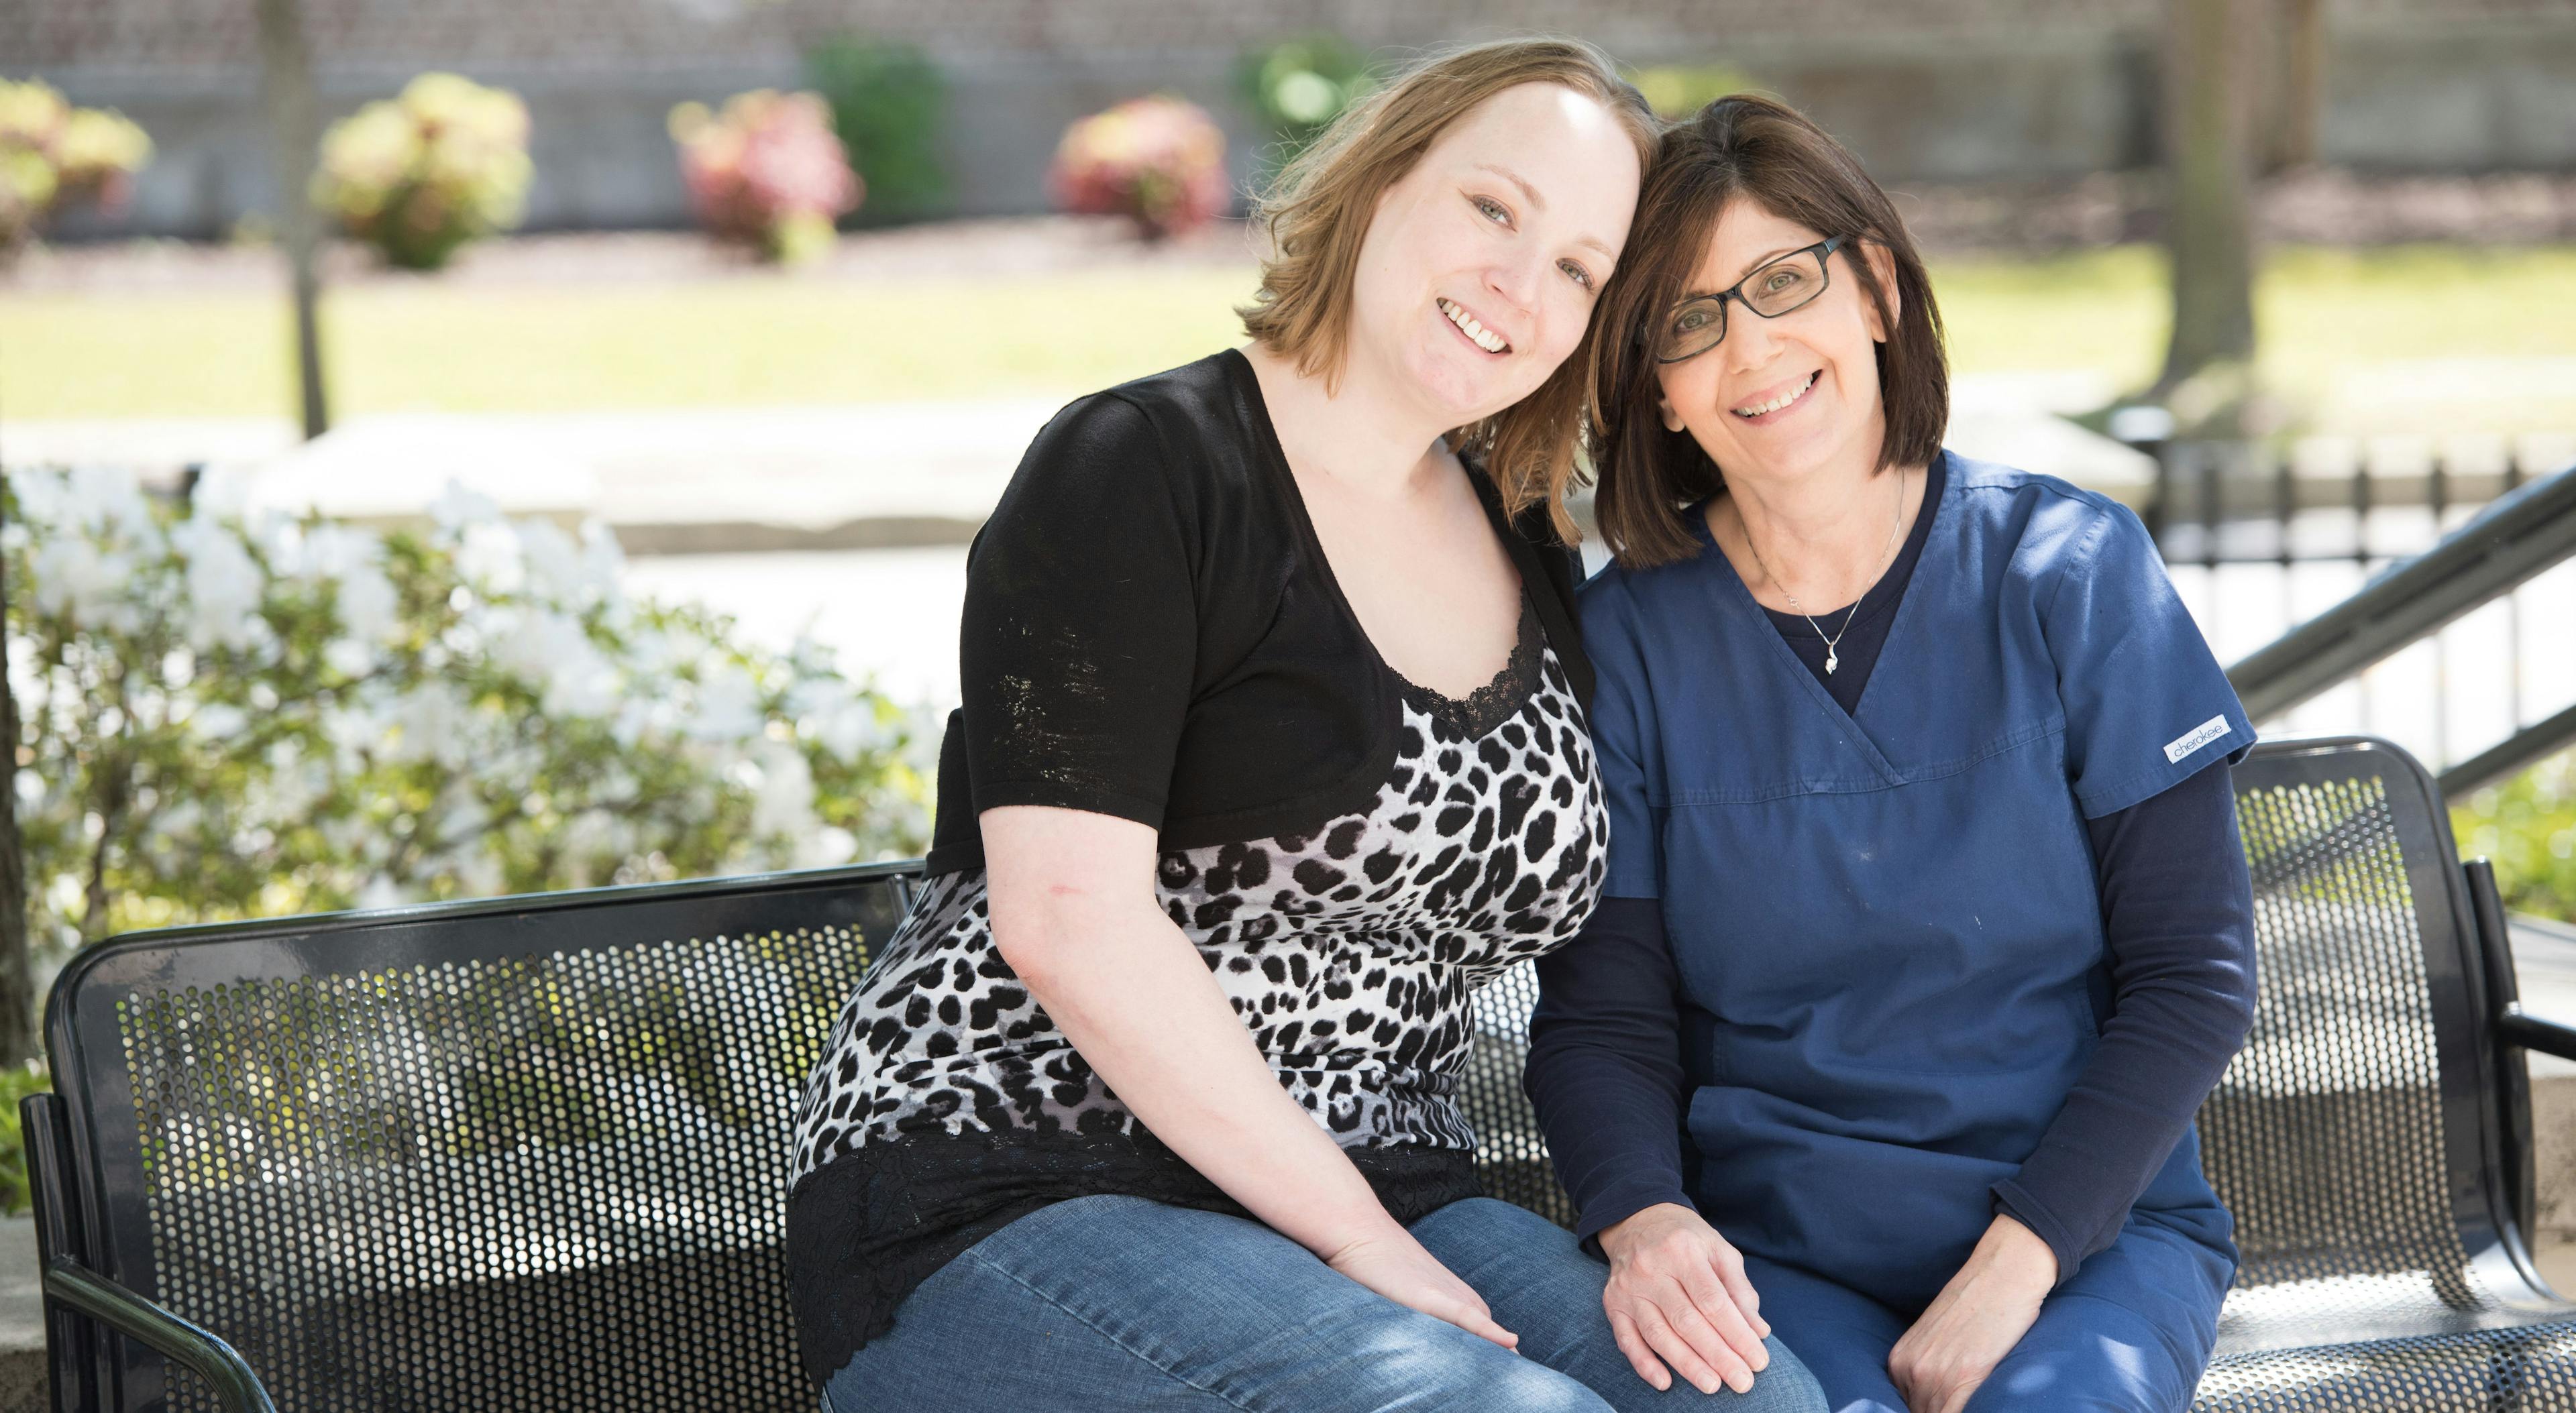 Tammy Wilsford and Lisa Craven, RN PHOTO BY JULIE G. ROWE